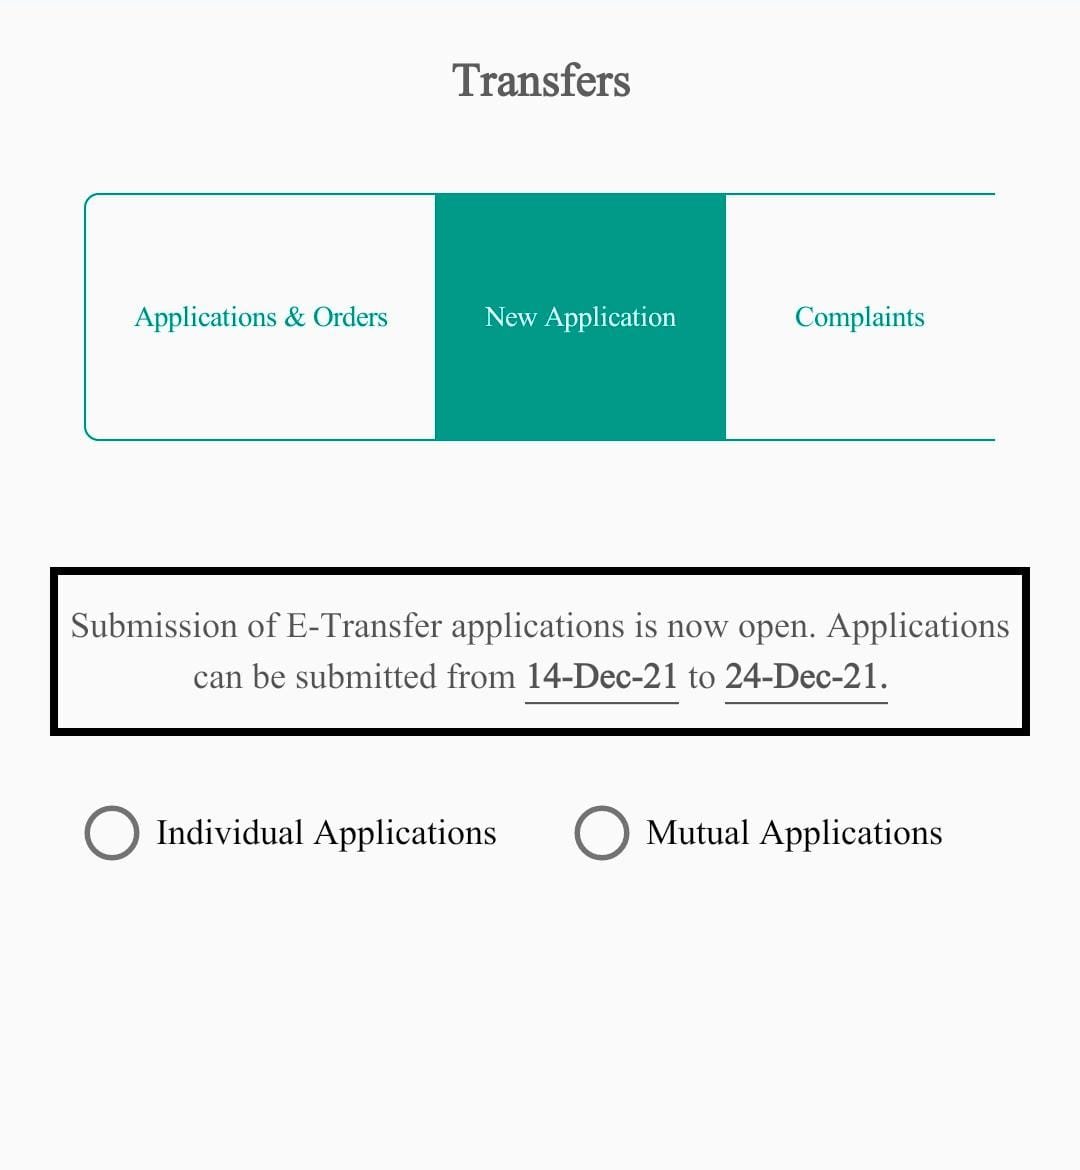 Submission of E-Transfer applications is now open till 24-12-2021